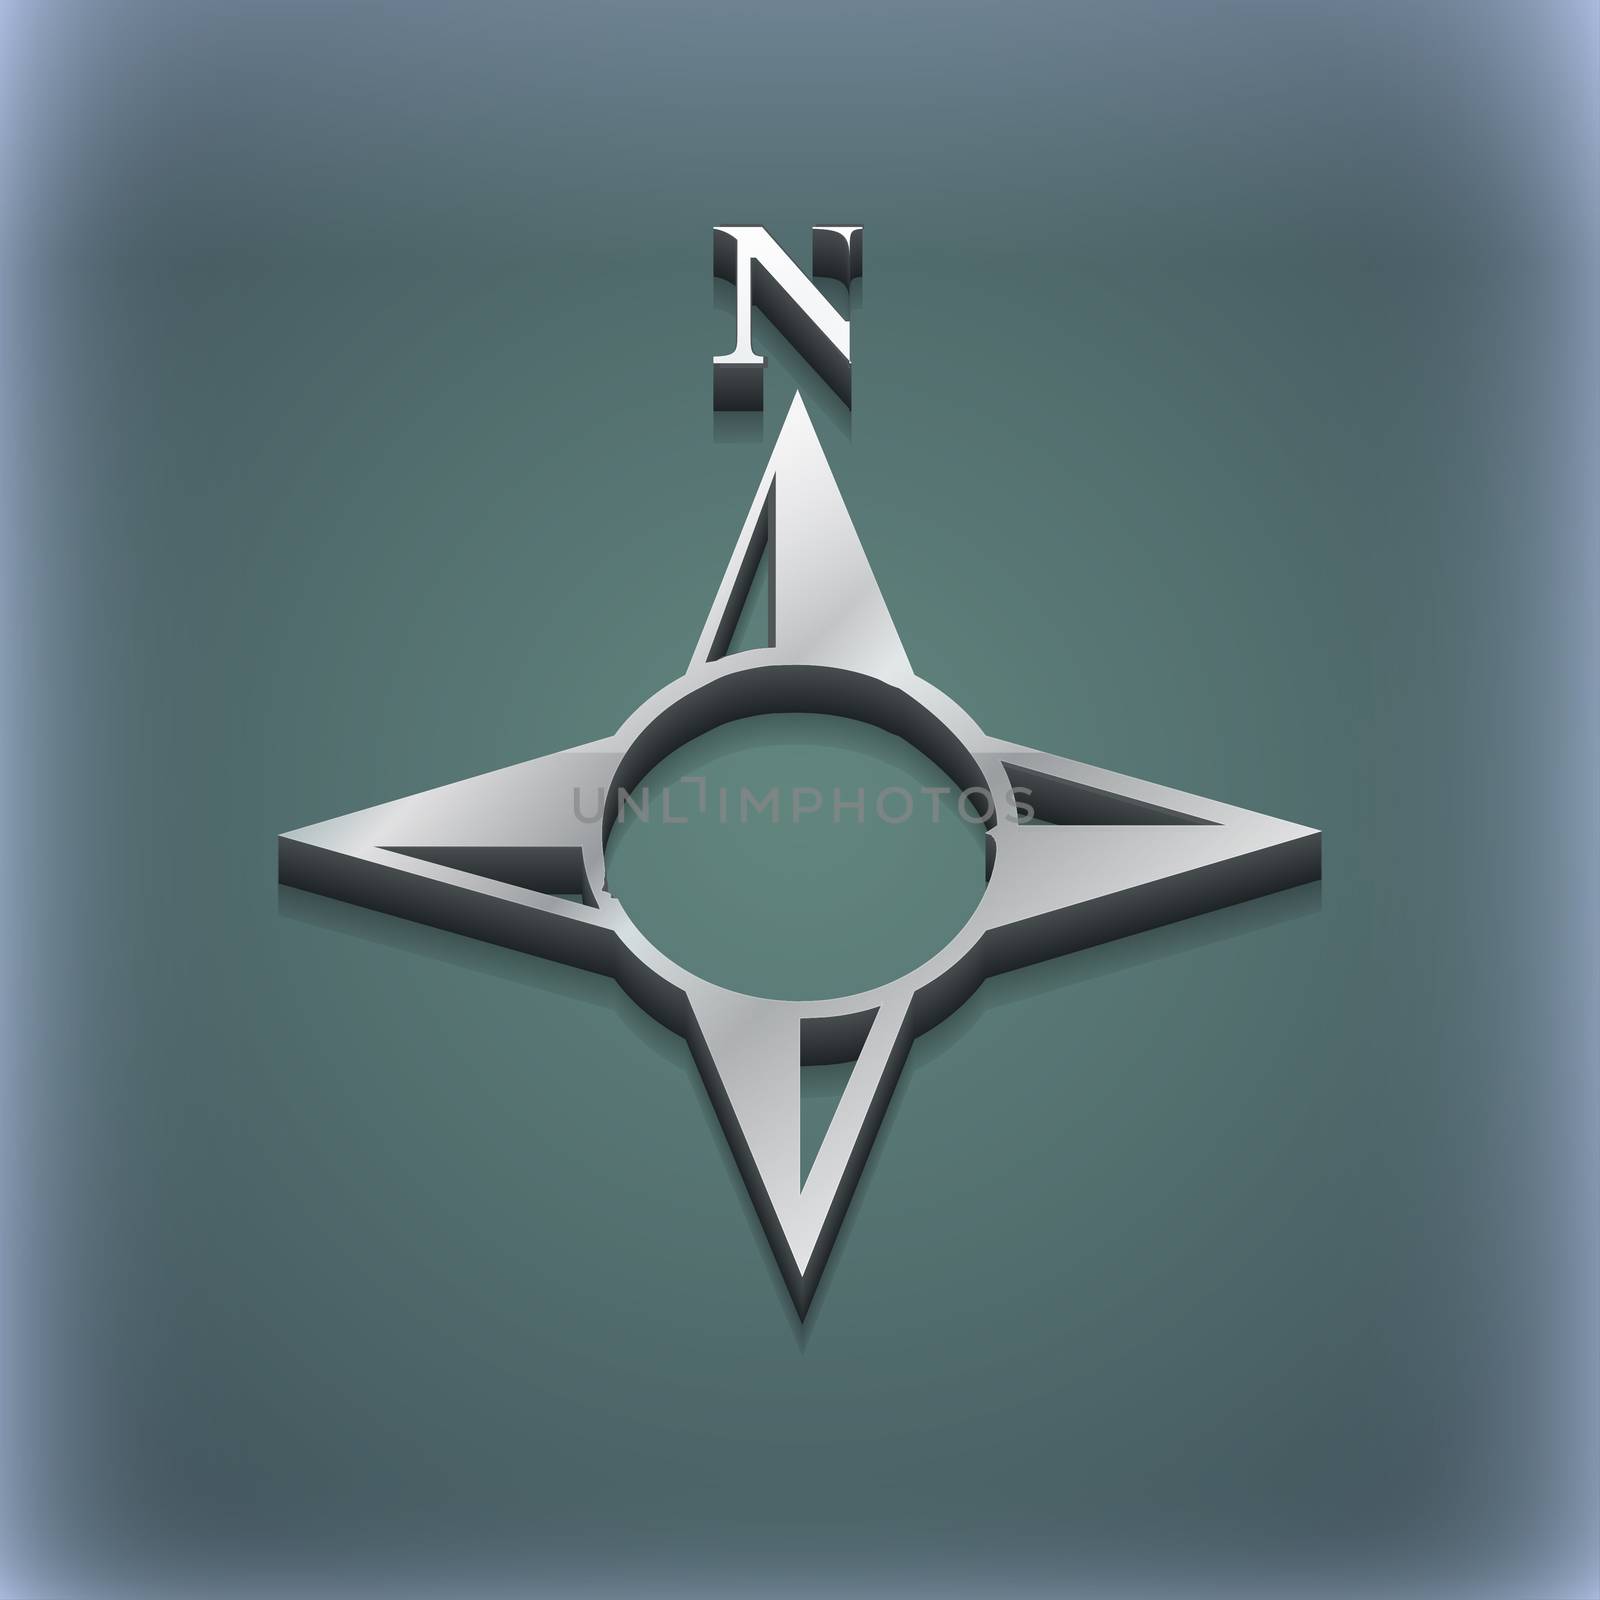 Compass icon symbol. 3D style. Trendy, modern design with space for your text illustration. Raster version